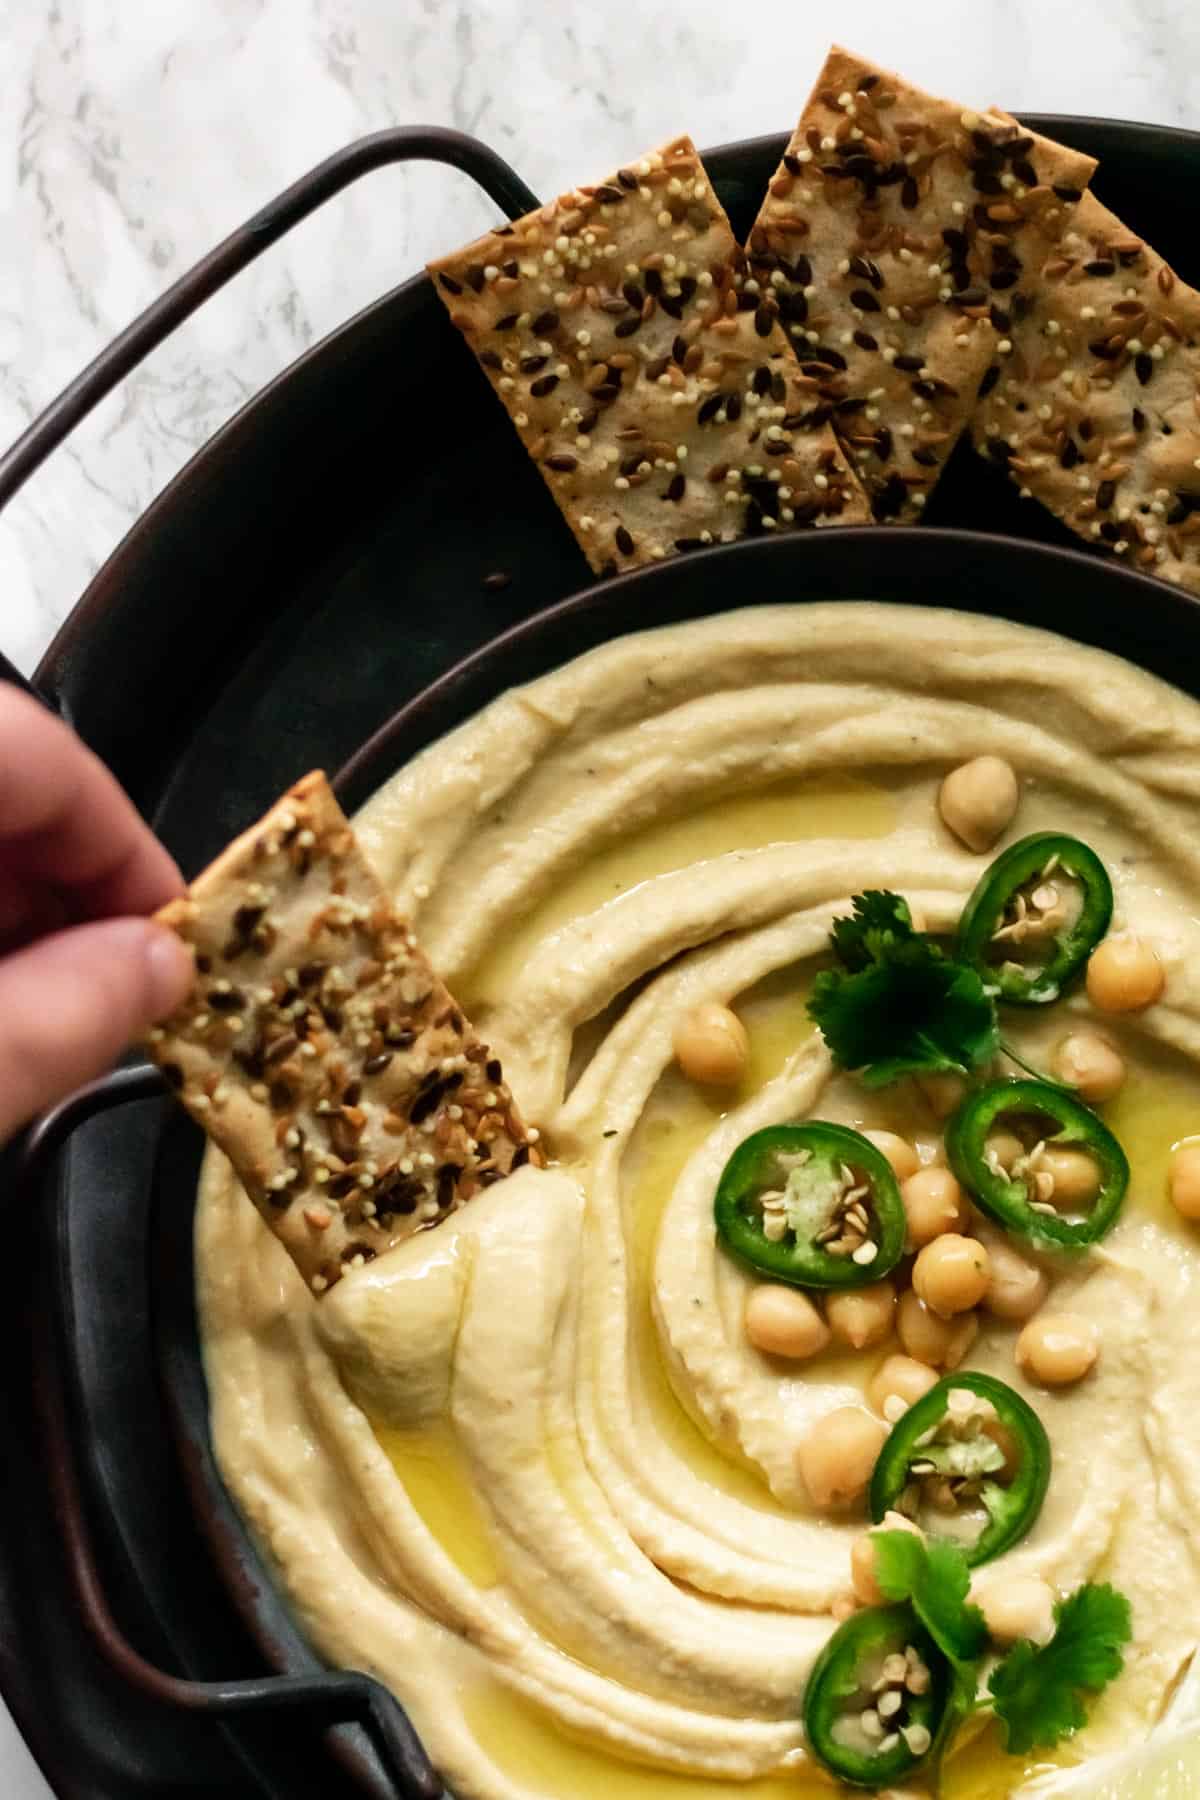 a cracker being dipped into hummus